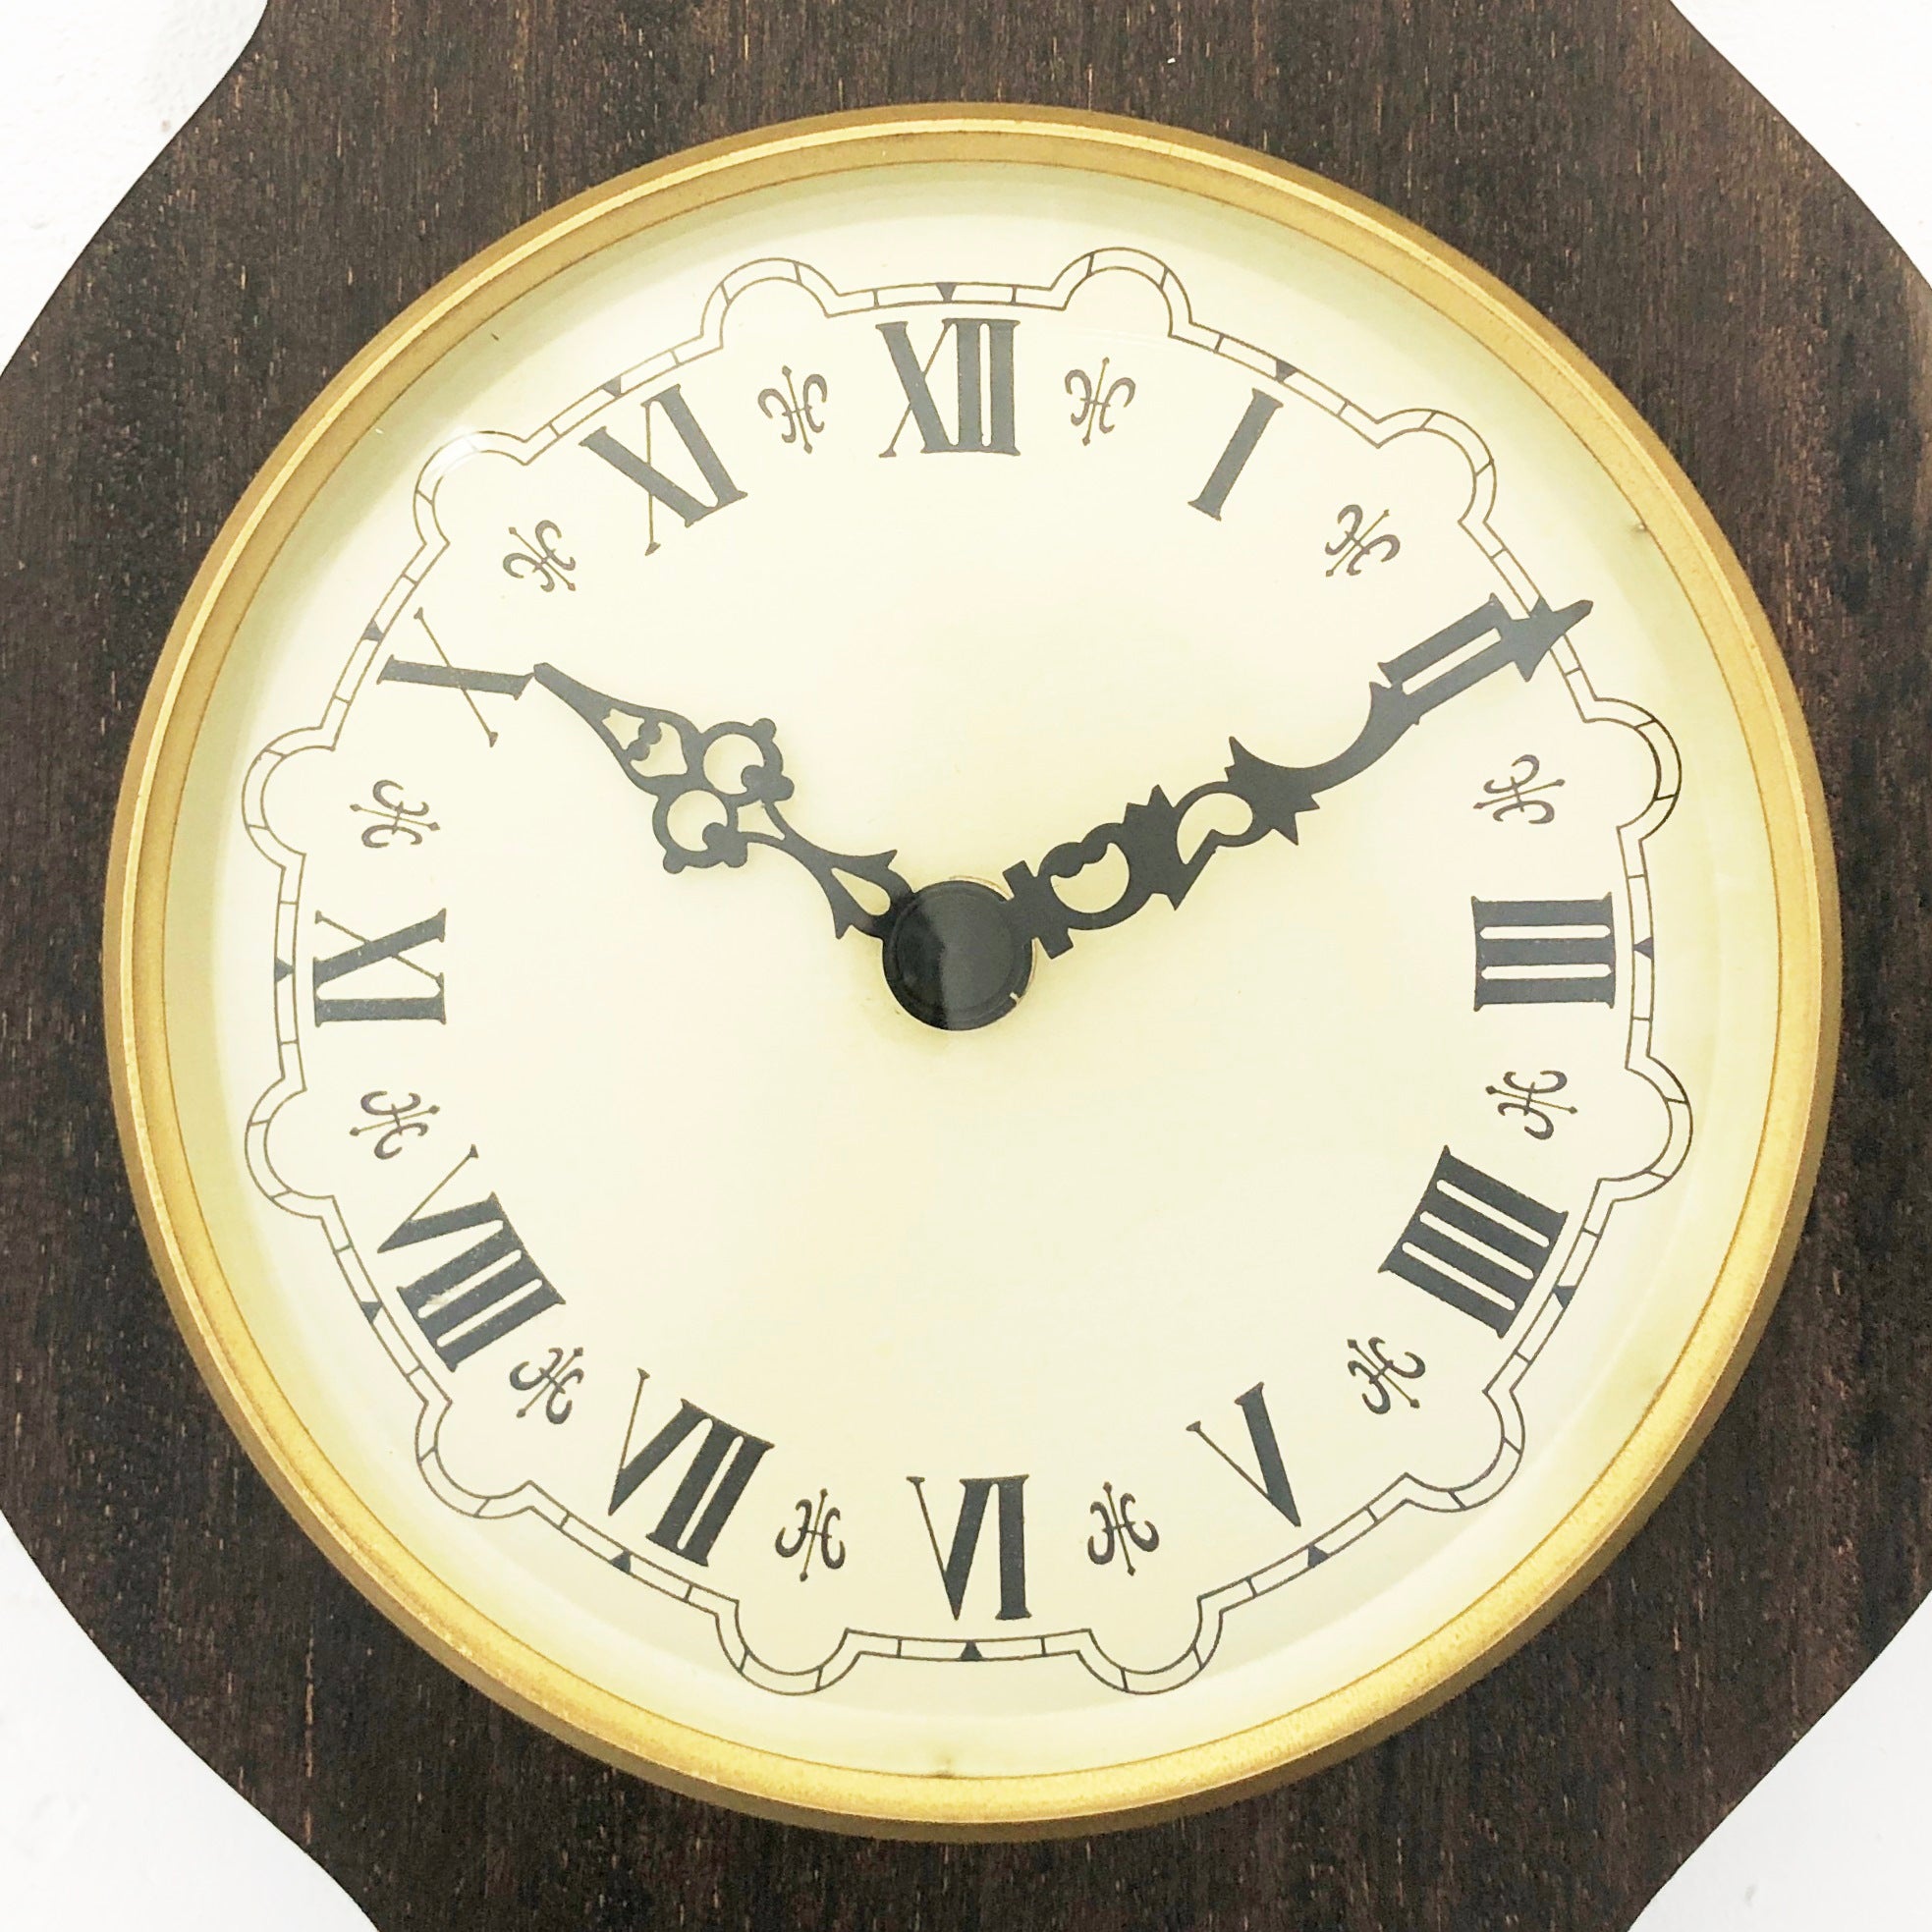 Vintage Banjo Style German Wall Clock with Thermometer | eXibit collection